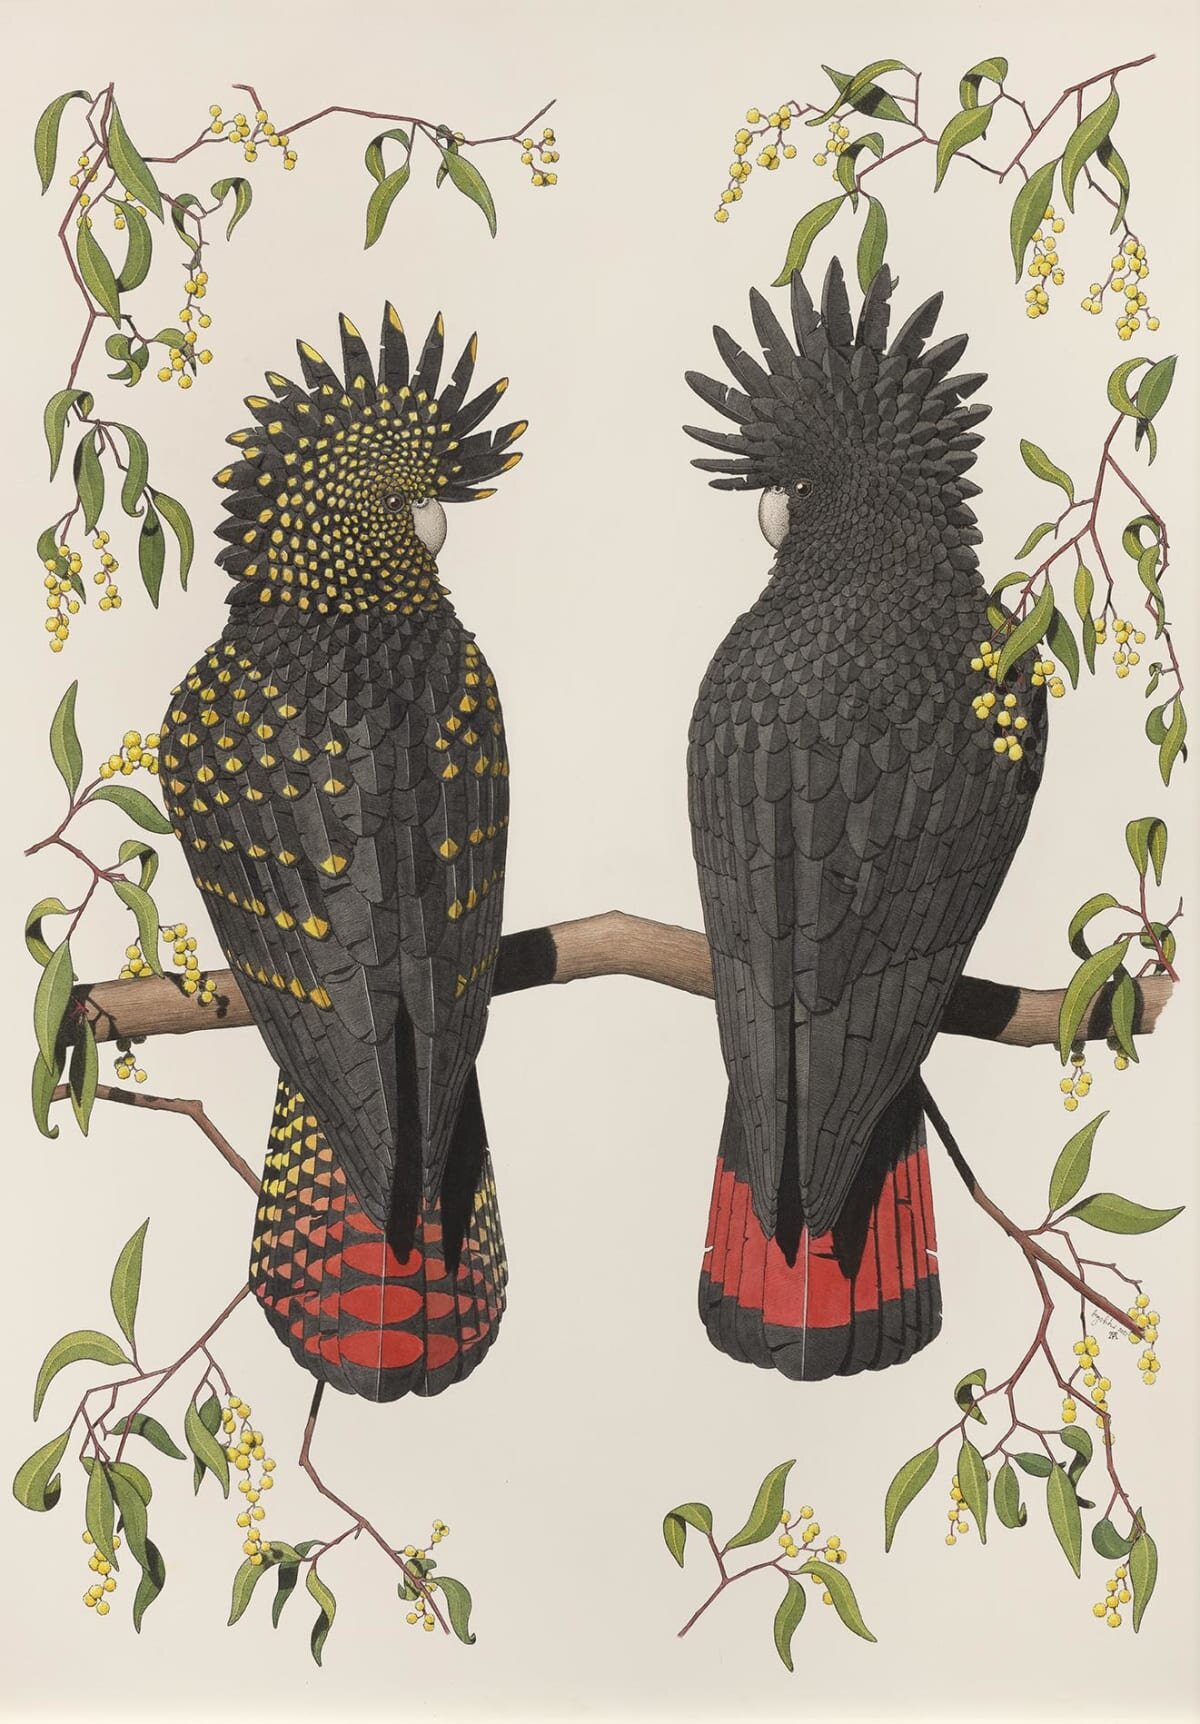 Red-tailed Black Cockatoos and Wattle